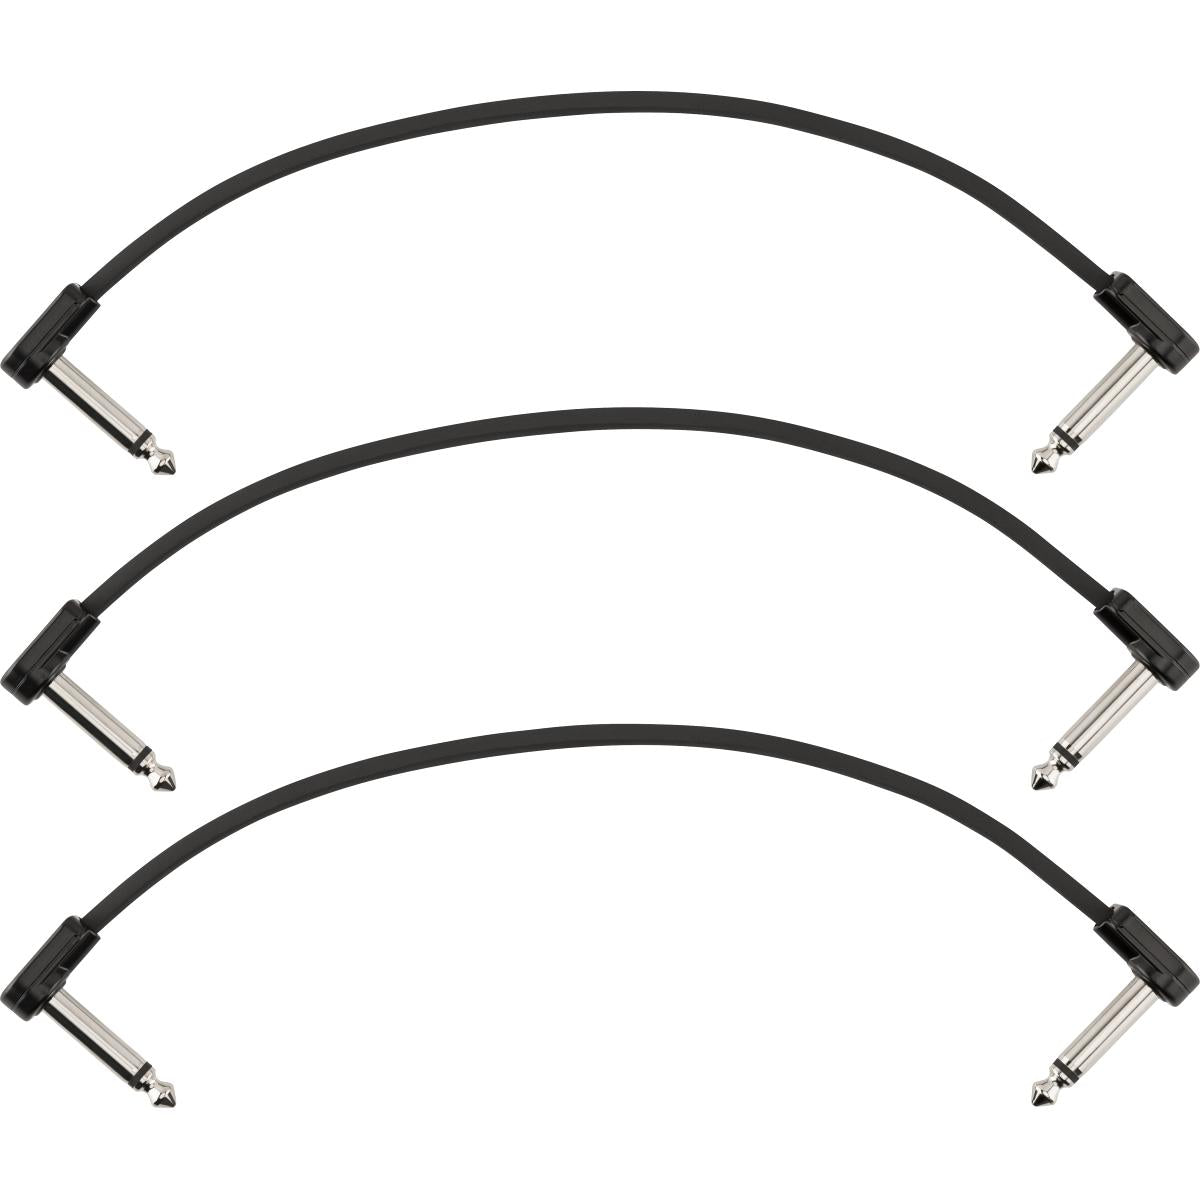 Fender Blockchain 8inch Cable 3-pack Angle/Angle - 0990825009